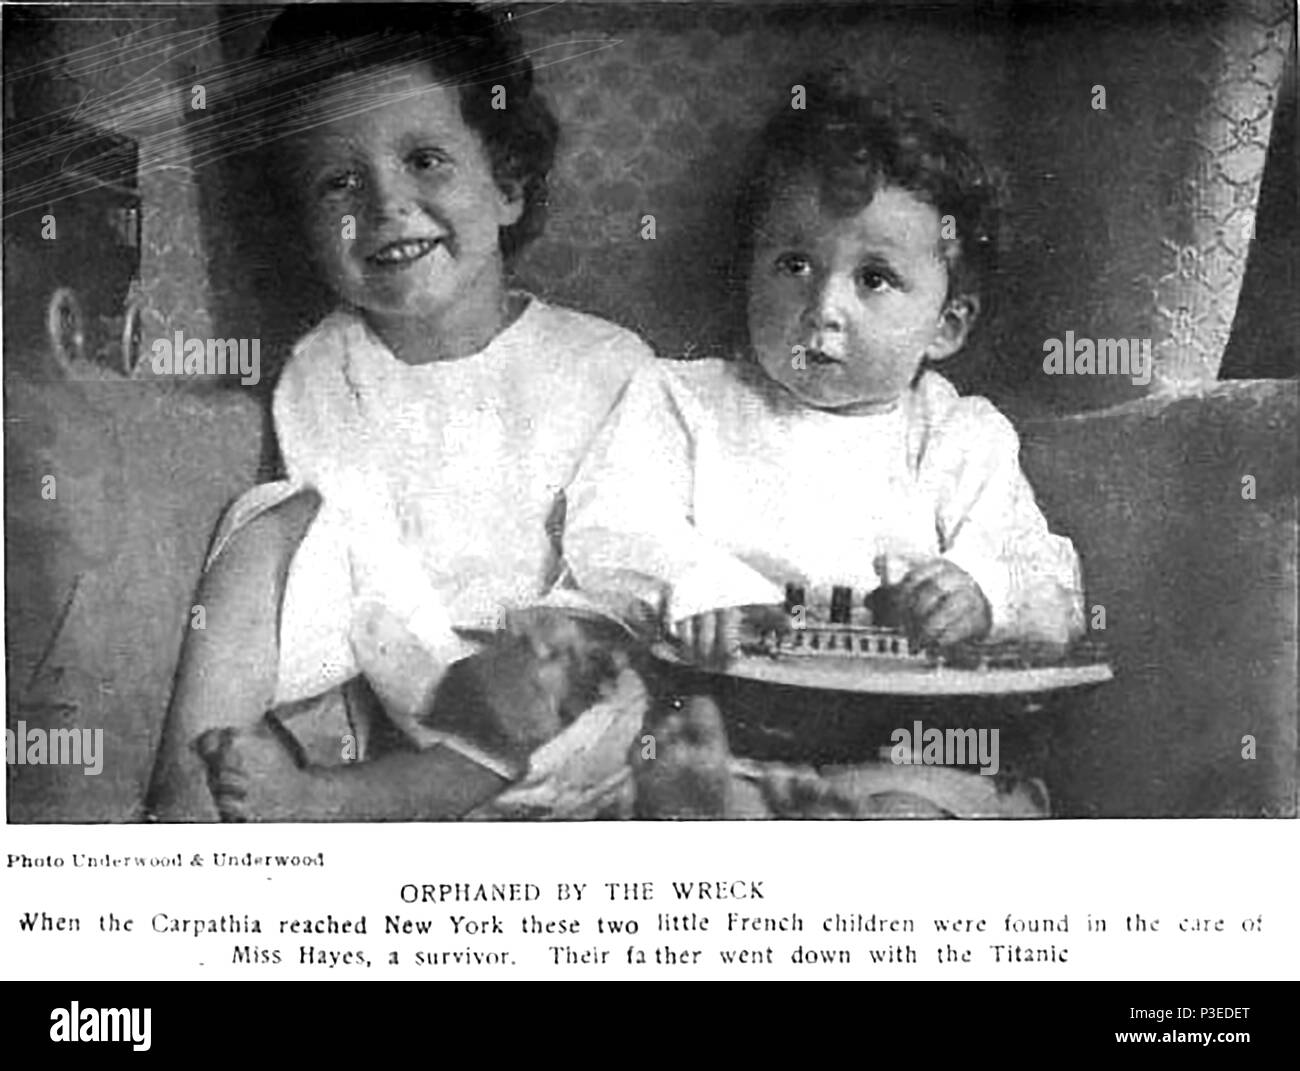 TITANIC - A 1912 newspaper photograph showing two French children orphaned by the Titanic disaster and saved by the Carpathia under the care of a Miss Hayes Stock Photo